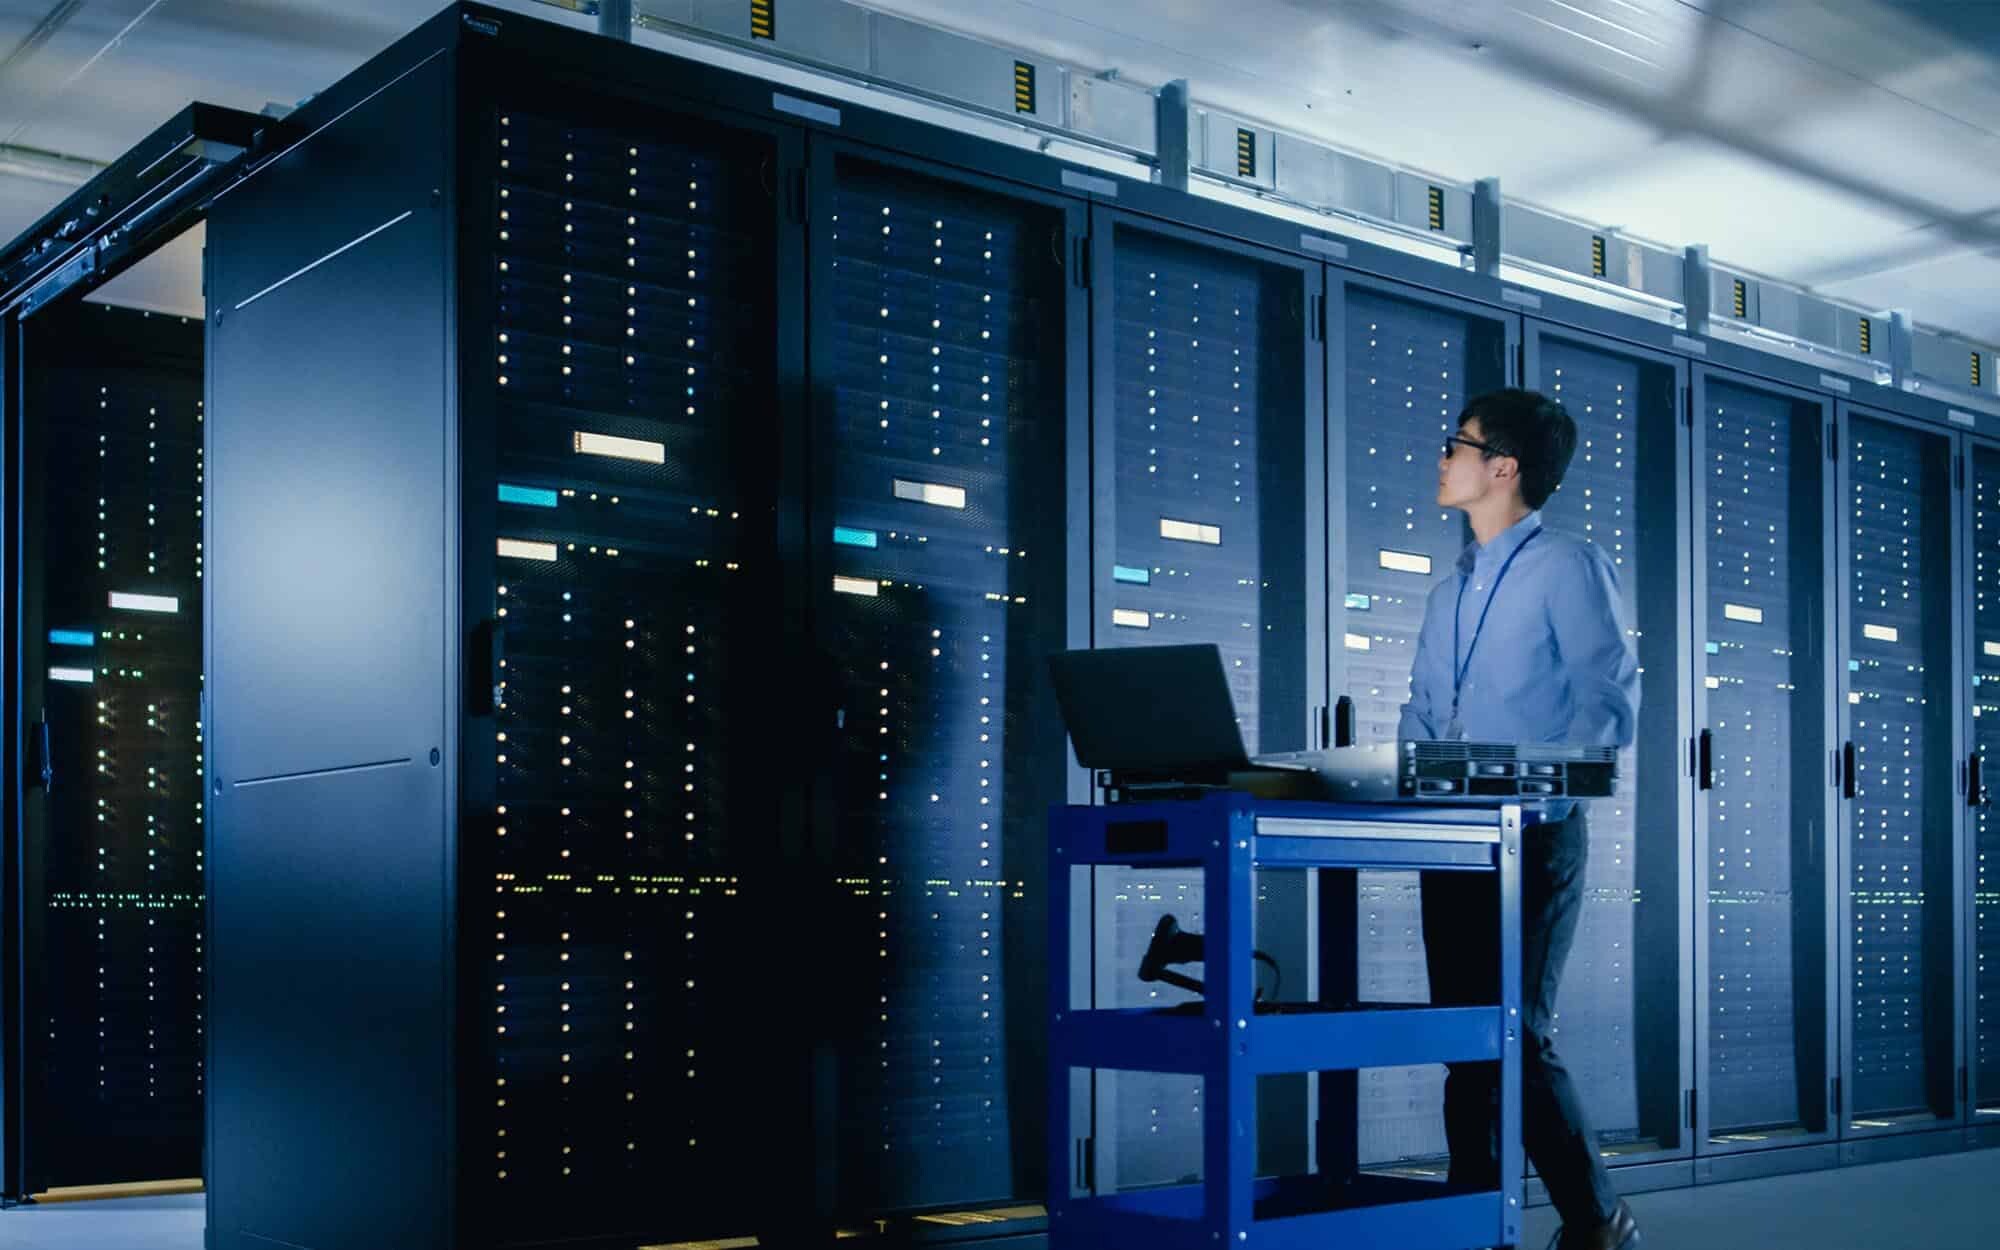 Side view of a man standing in a server room with a computer cart